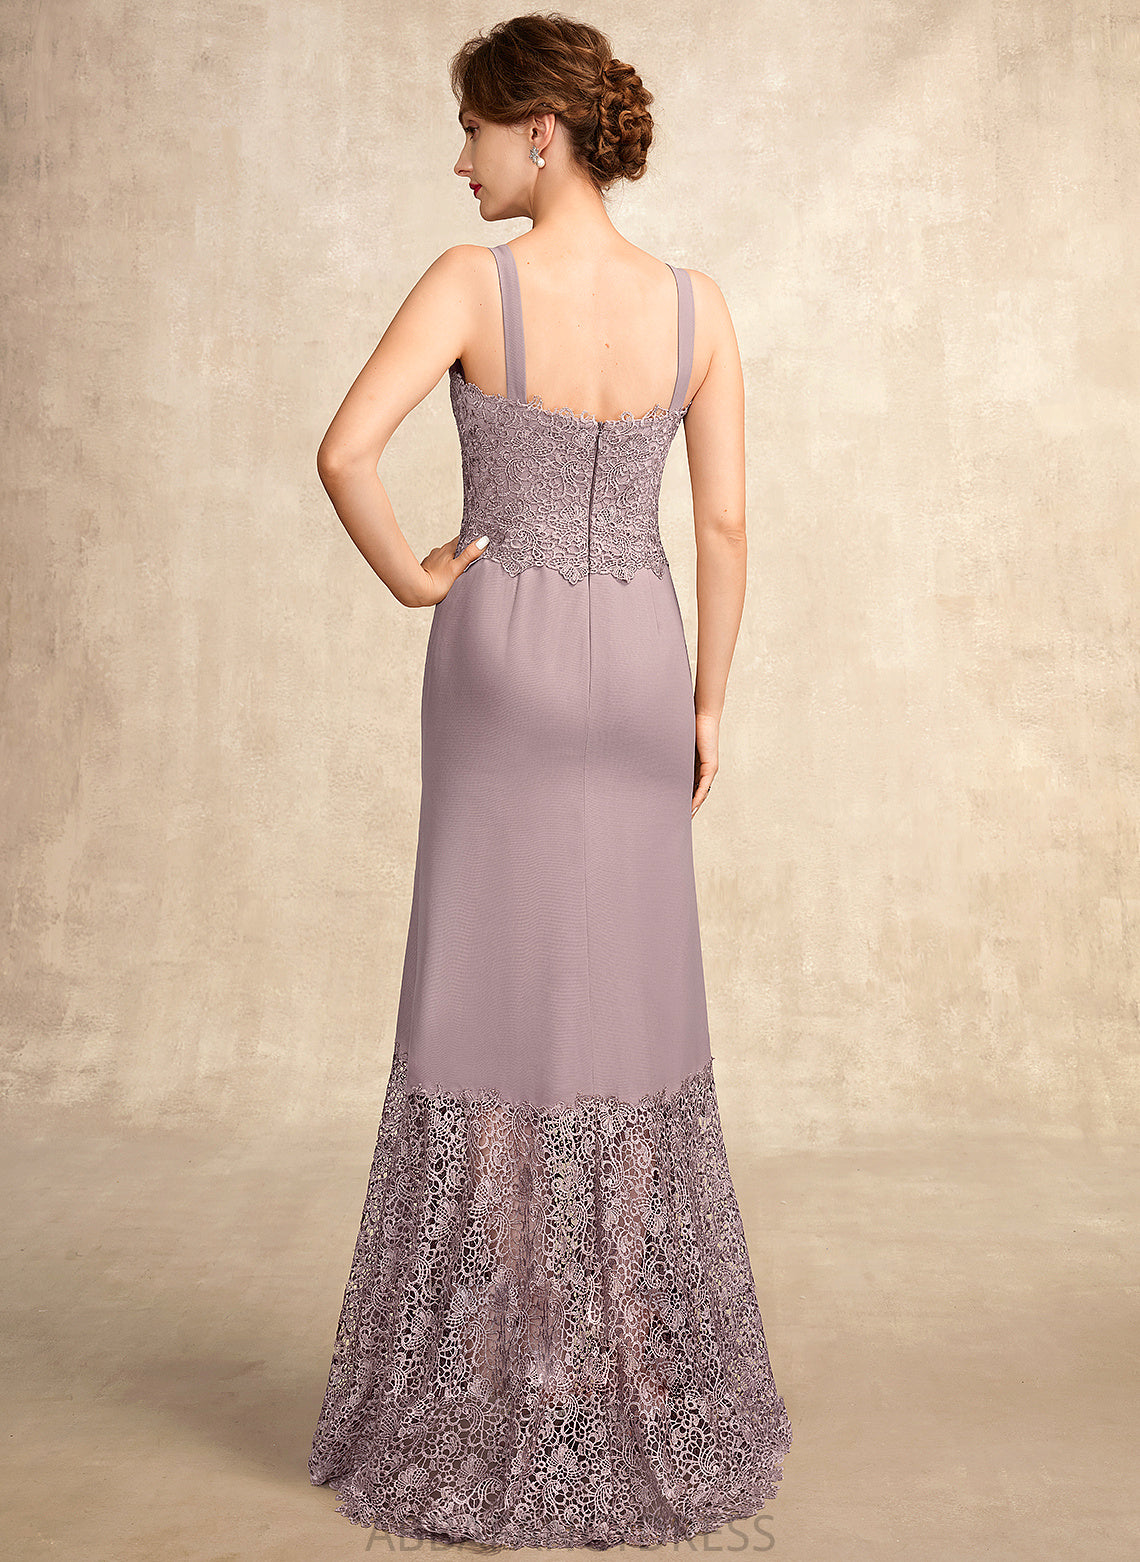 of Dress Mother Lace Chiffon Mother of the Bride Dresses Bride Barbara Trumpet/Mermaid the Square Asymmetrical Neckline